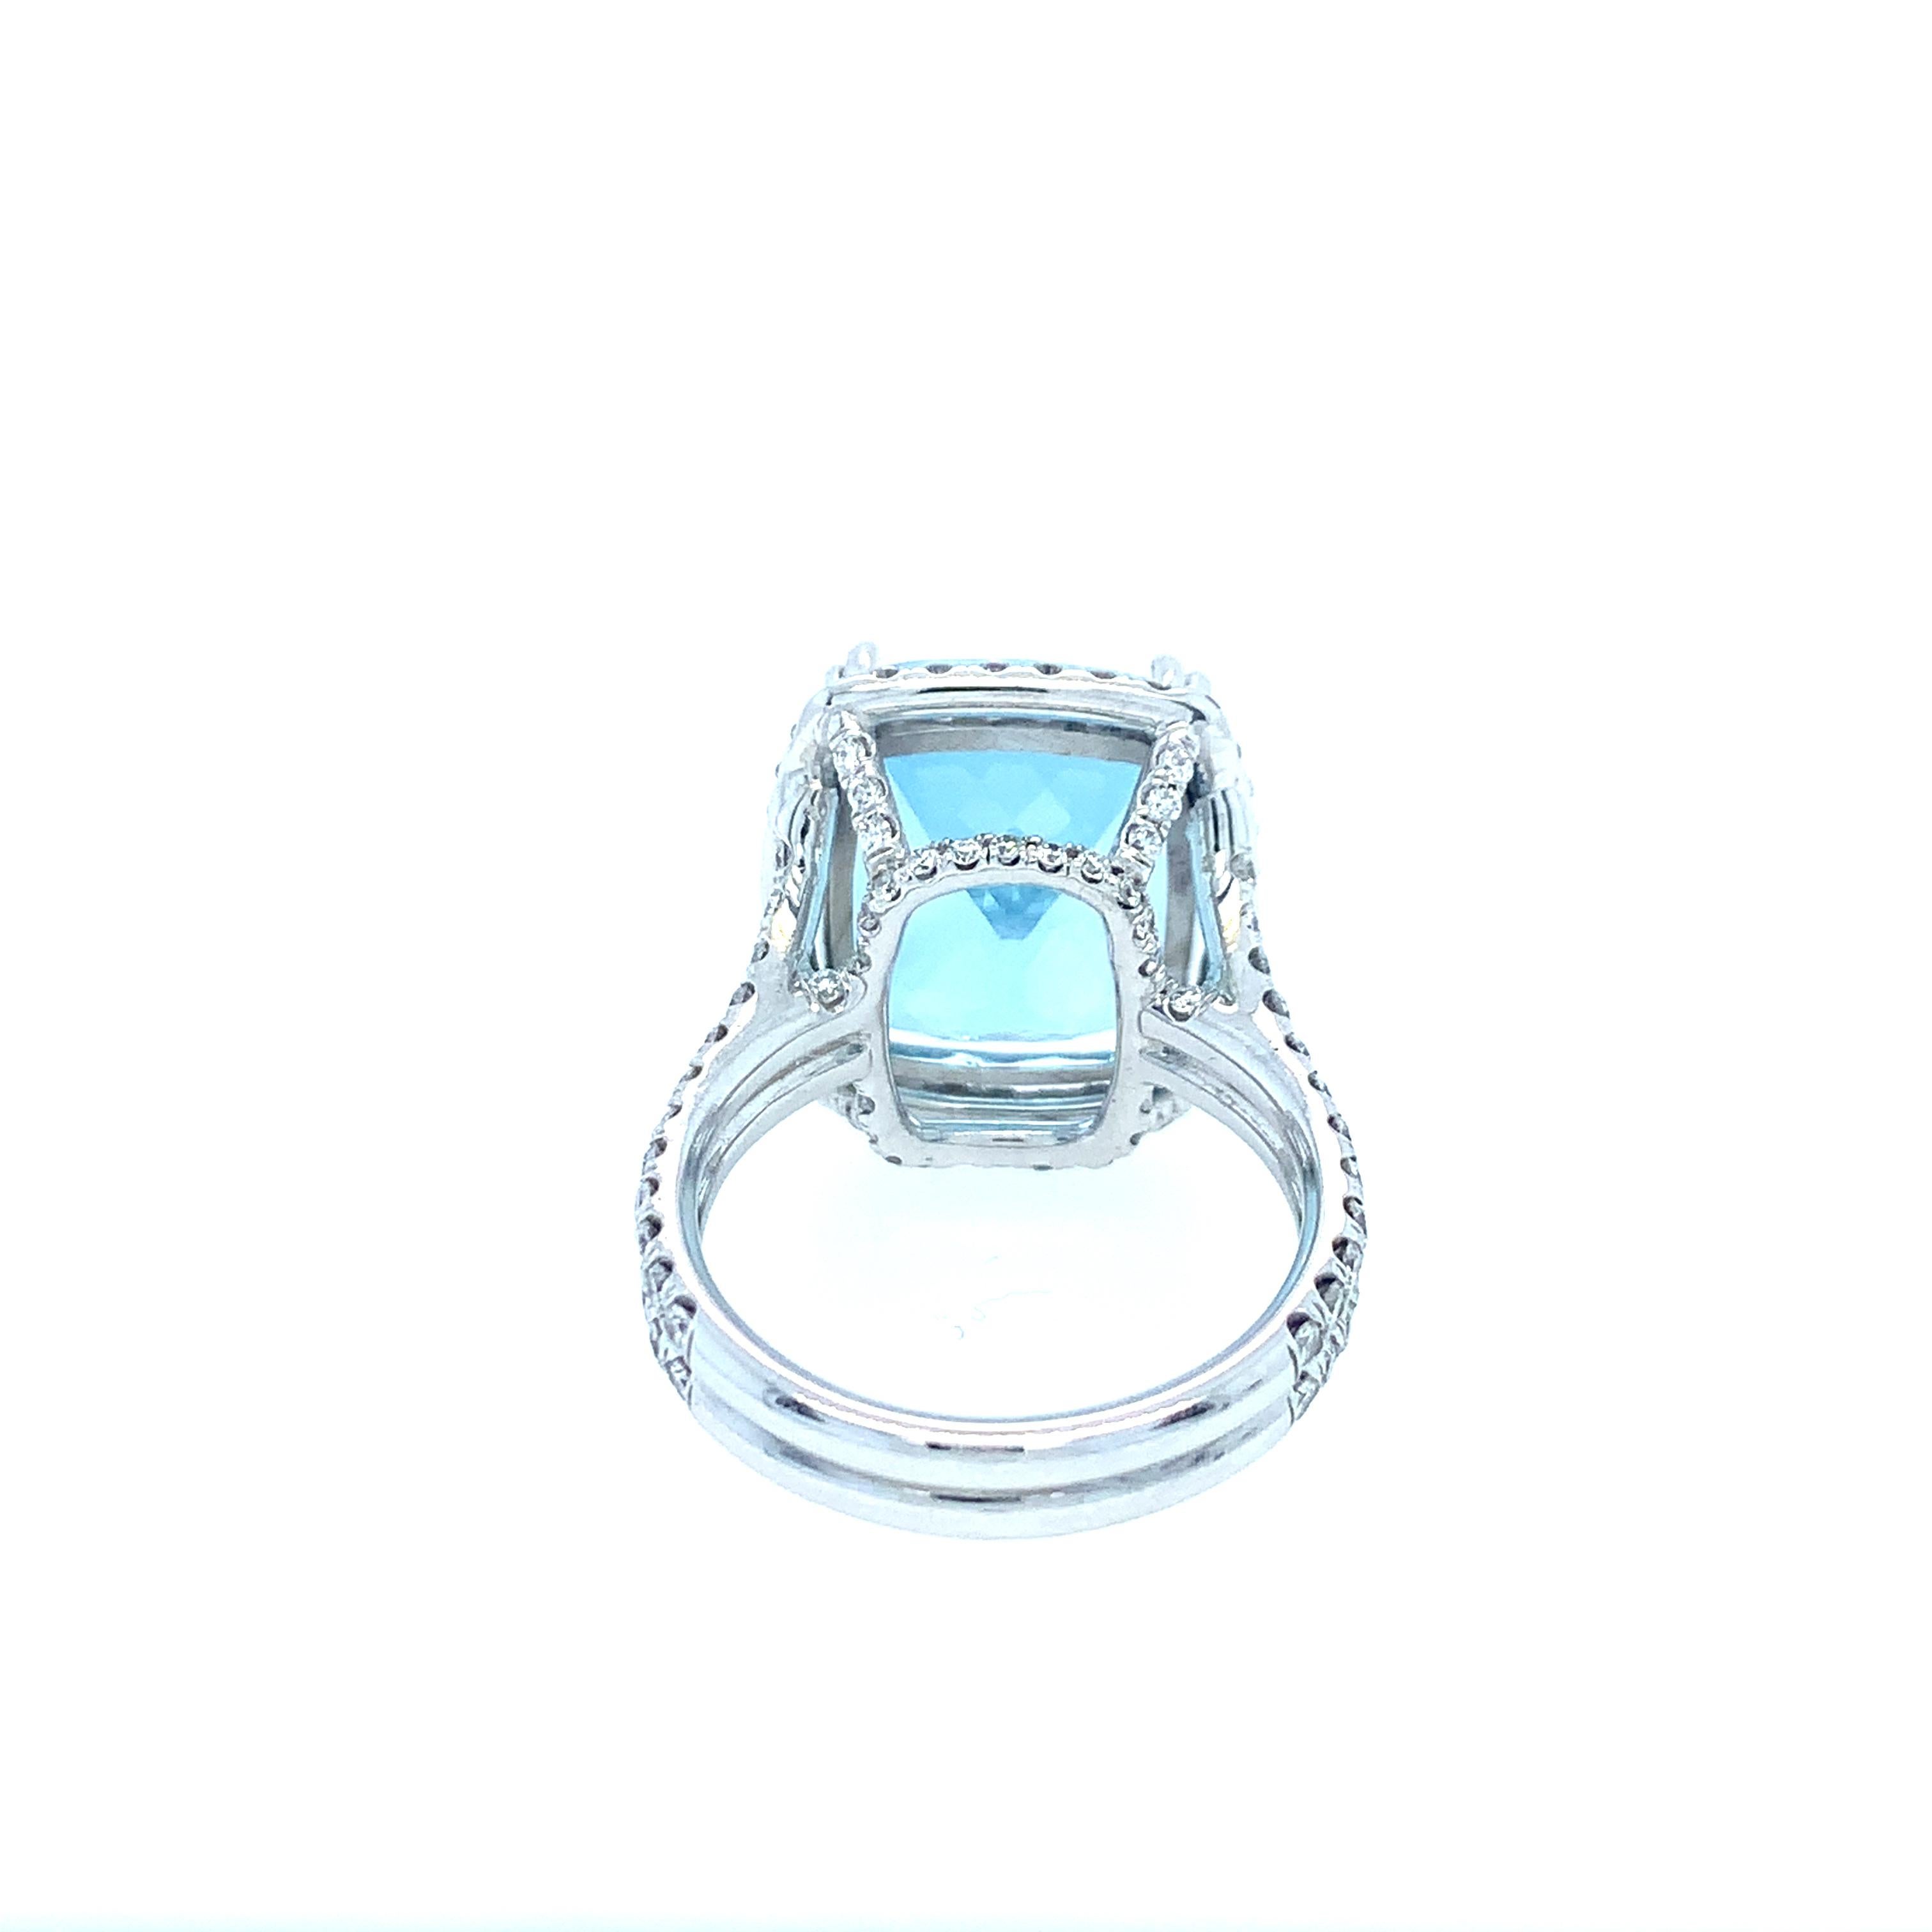 10.77 Carat Aquamarine and 1.27 Carat Diamond Ring In New Condition For Sale In Delray Beach, FL